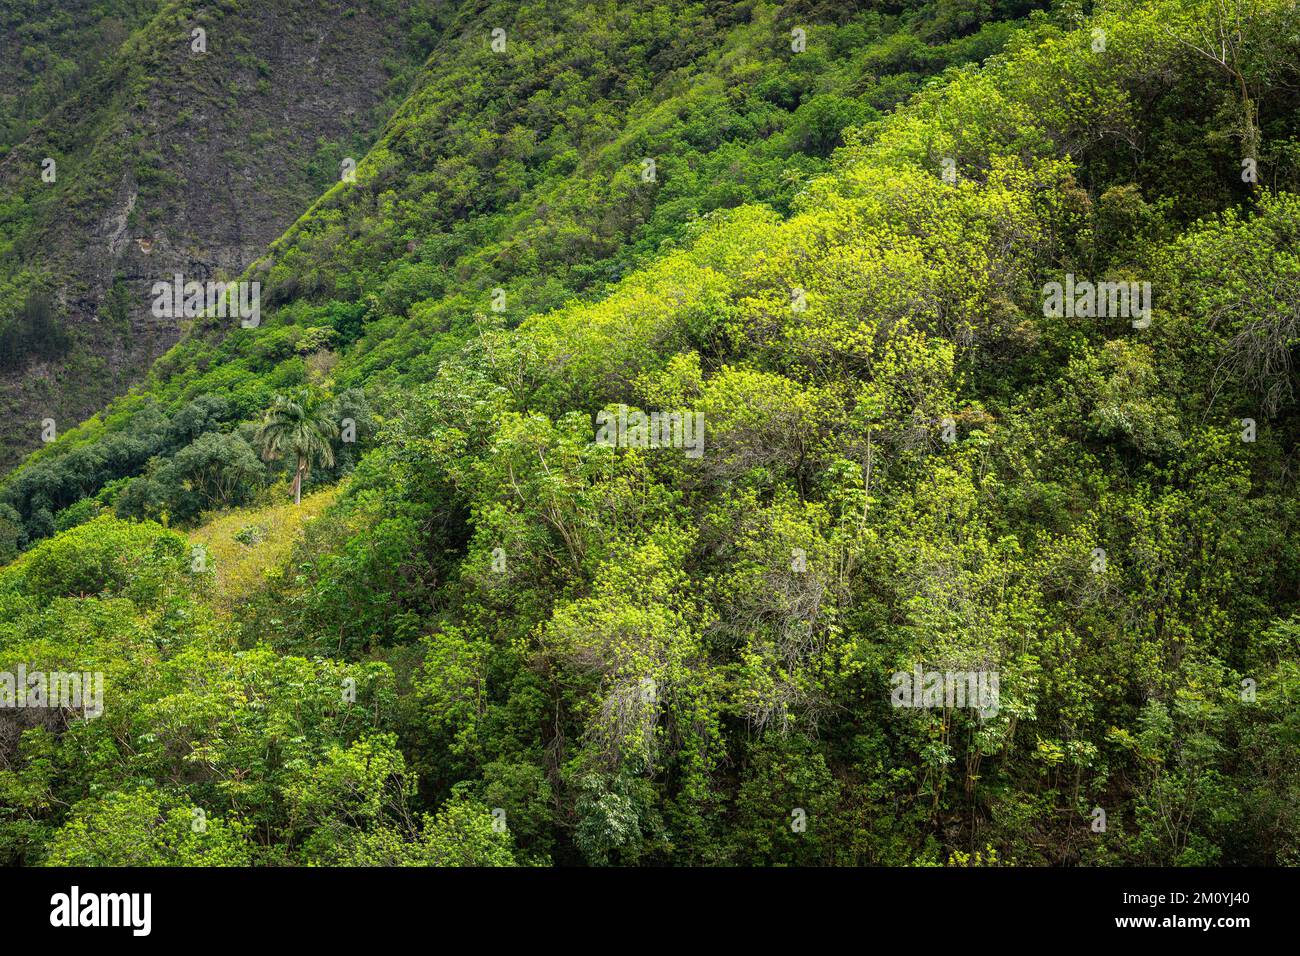 Lush tropical forest, trees, and vegetation on mountainsides above the Iao Valley, Maui Stock Photo